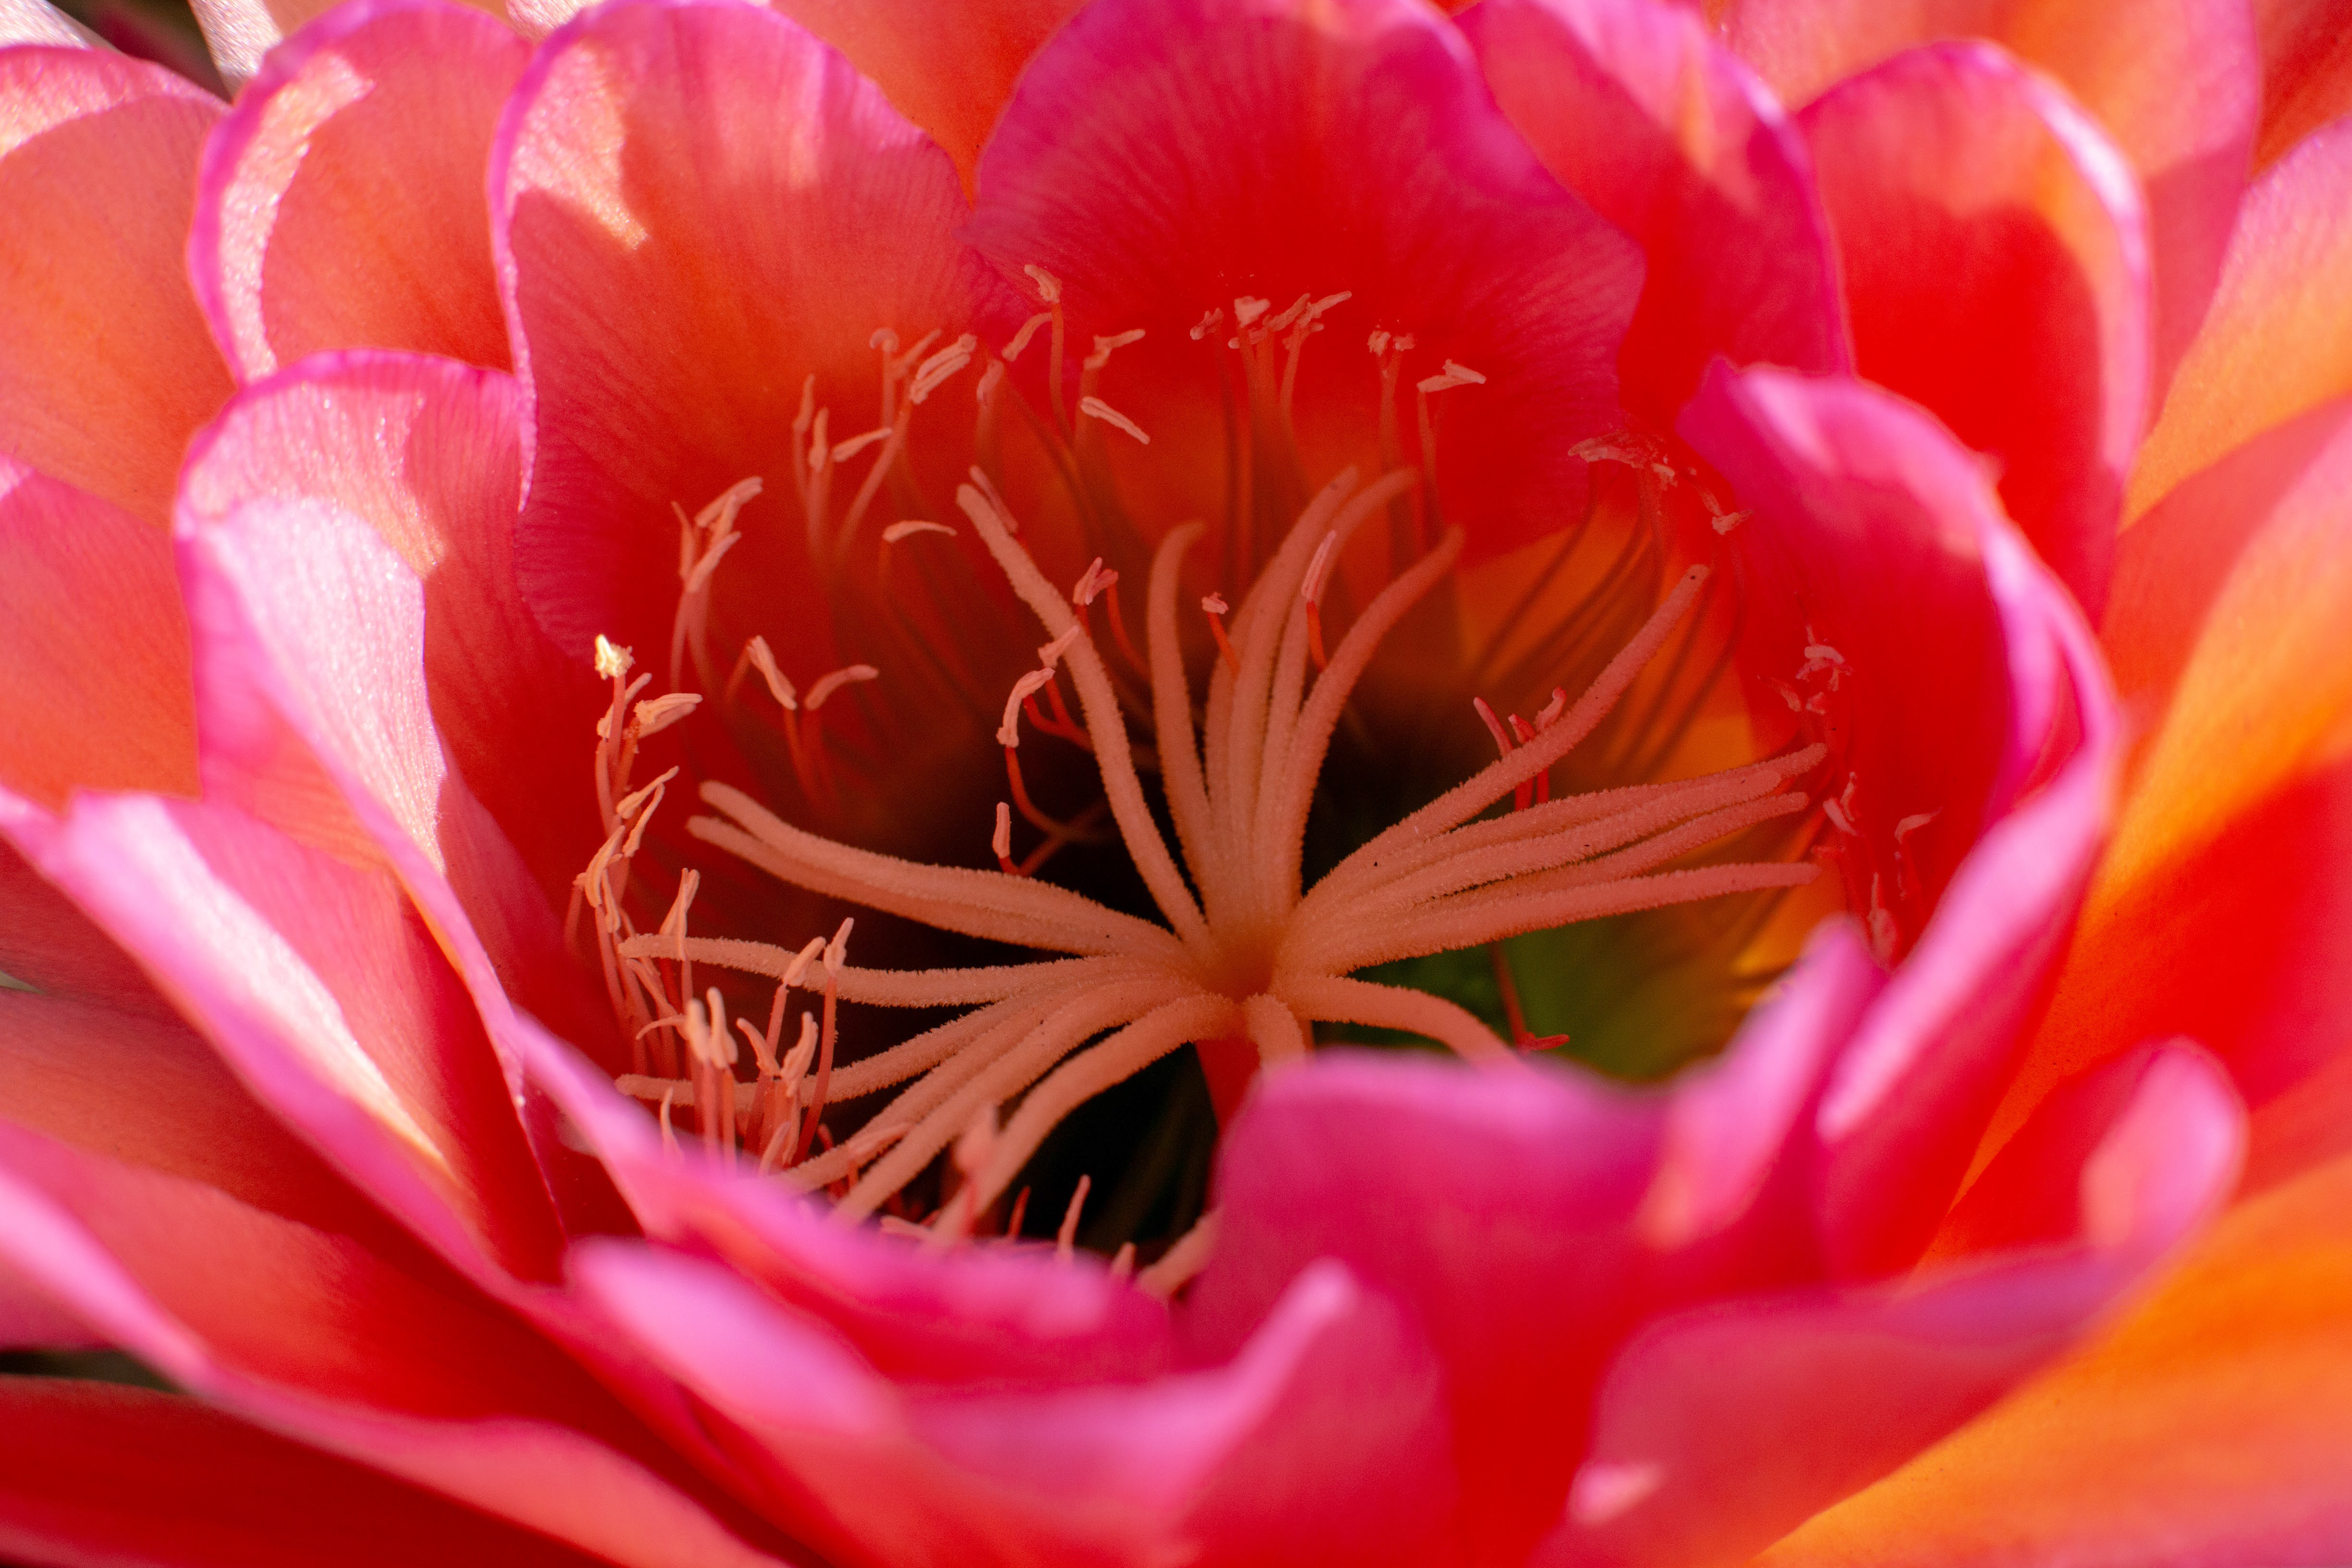 Photo by Greg Ralbovsky  |  Cactus Flower Bloom from this Spring